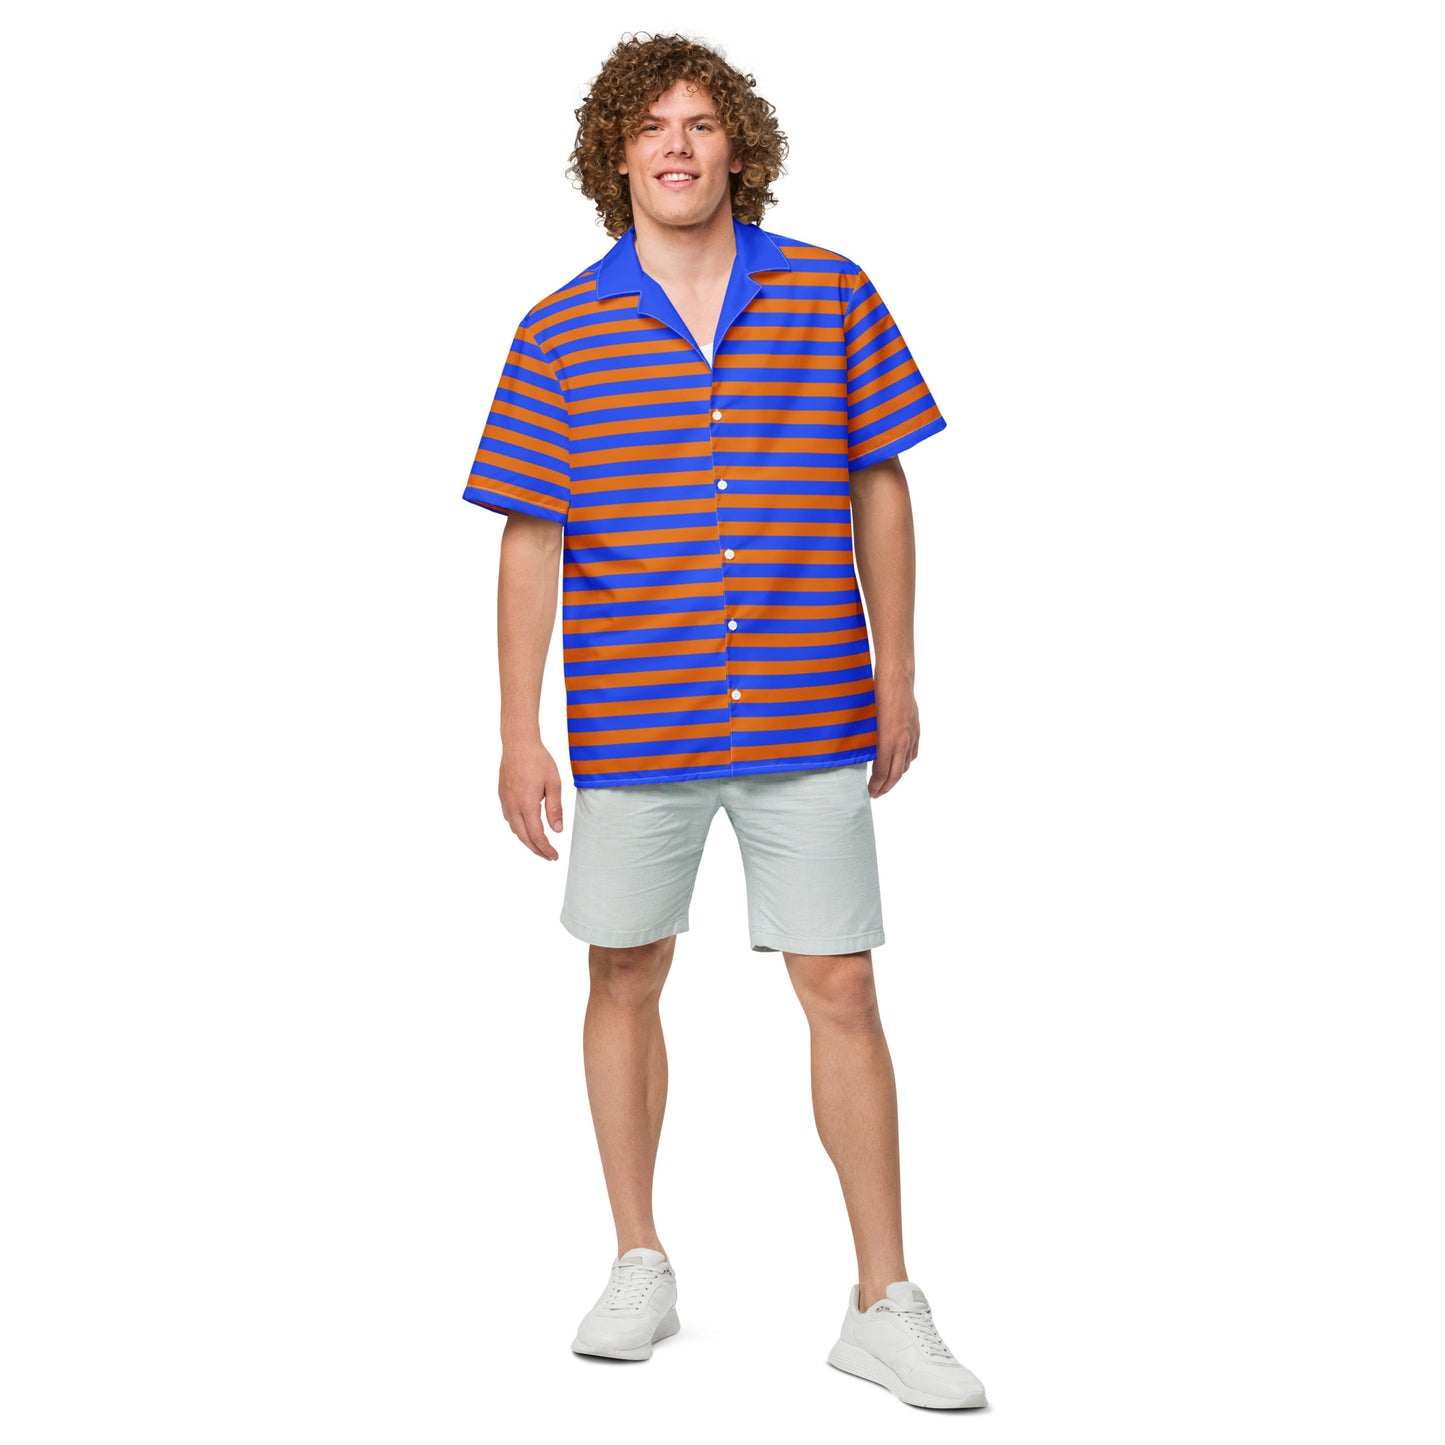 A stylish short sleeve shirt featuring blue and orange stripes, adding a touch of flair to your wardrobe.